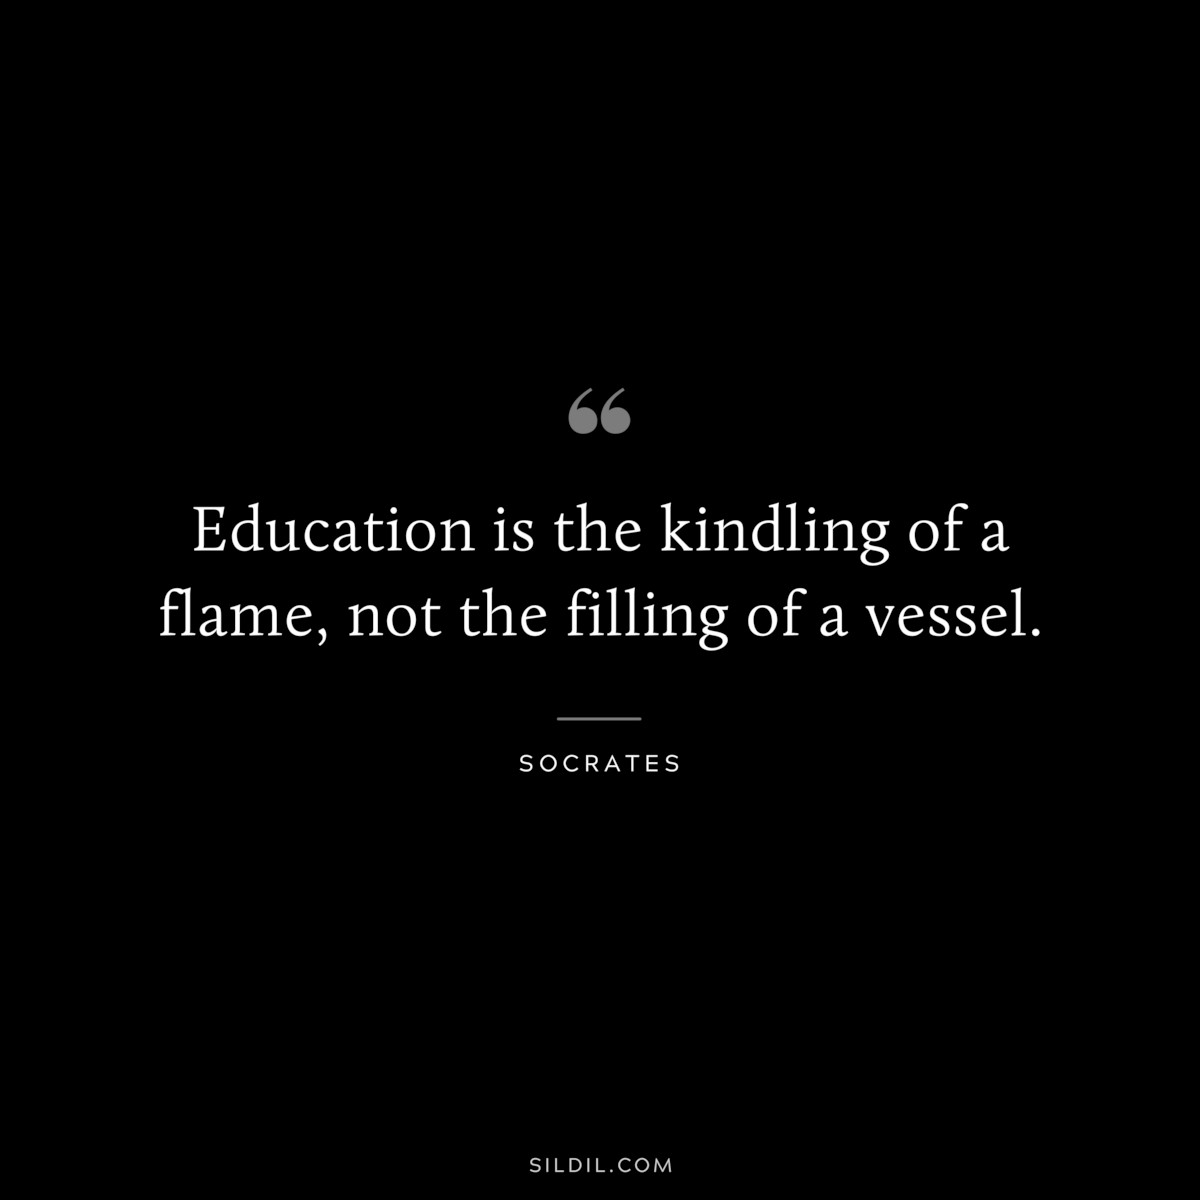 Education is the kindling of a flame, not the filling of a vessel. ― Socrates